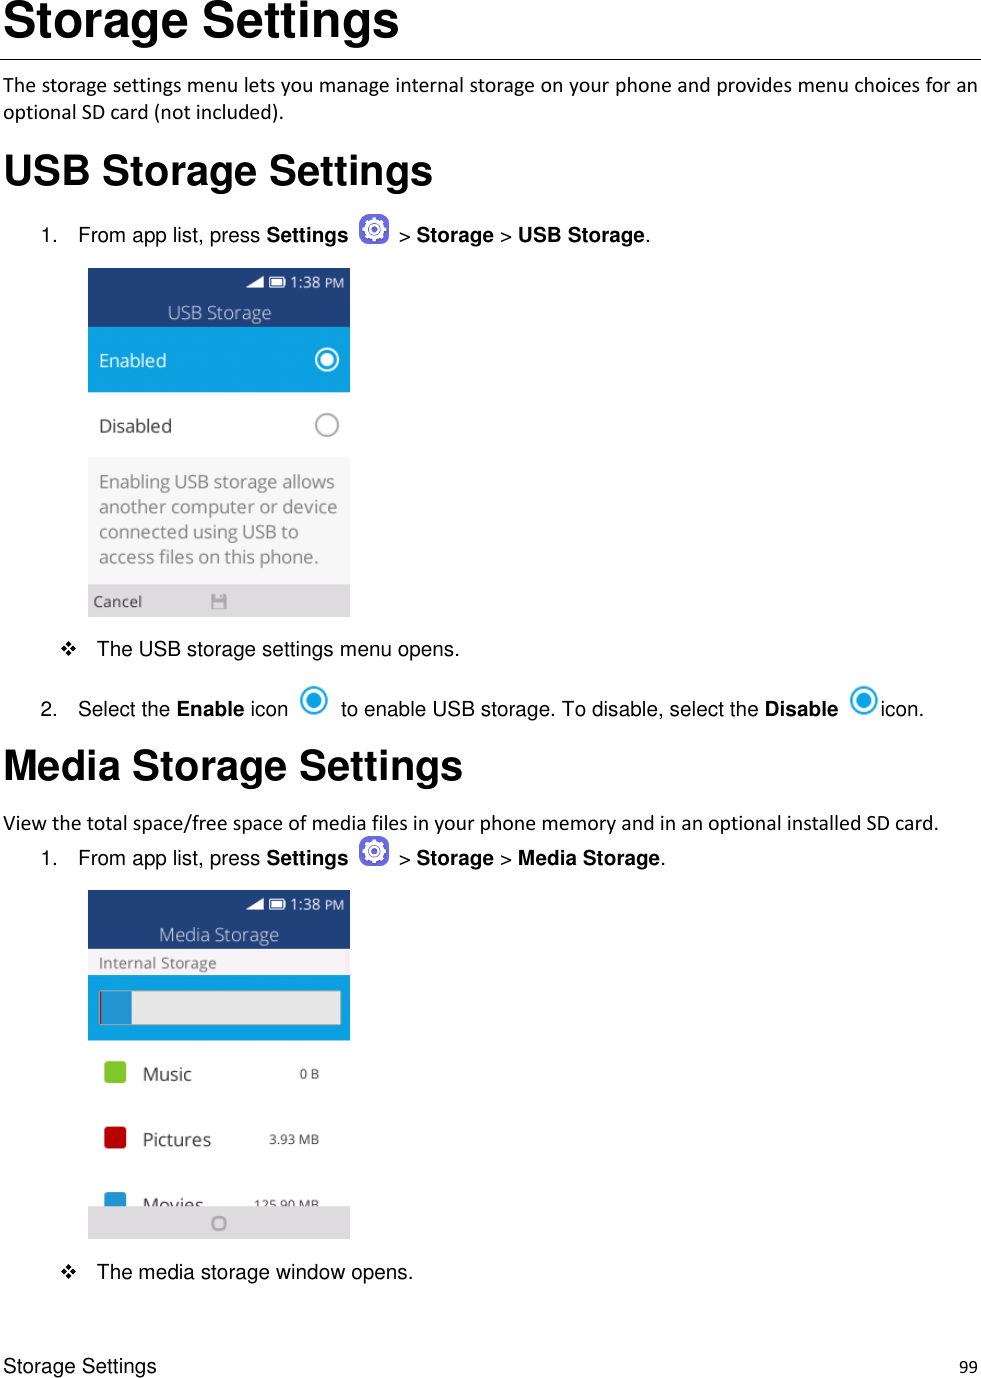 Storage Settings    99 Storage Settings The storage settings menu lets you manage internal storage on your phone and provides menu choices for an optional SD card (not included). USB Storage Settings 1.  From app list, press Settings    &gt; Storage &gt; USB Storage.         The USB storage settings menu opens. 2.  Select the Enable icon    to enable USB storage. To disable, select the Disable  icon.   Media Storage Settings View the total space/free space of media files in your phone memory and in an optional installed SD card. 1.  From app list, press Settings    &gt; Storage &gt; Media Storage.         The media storage window opens. 